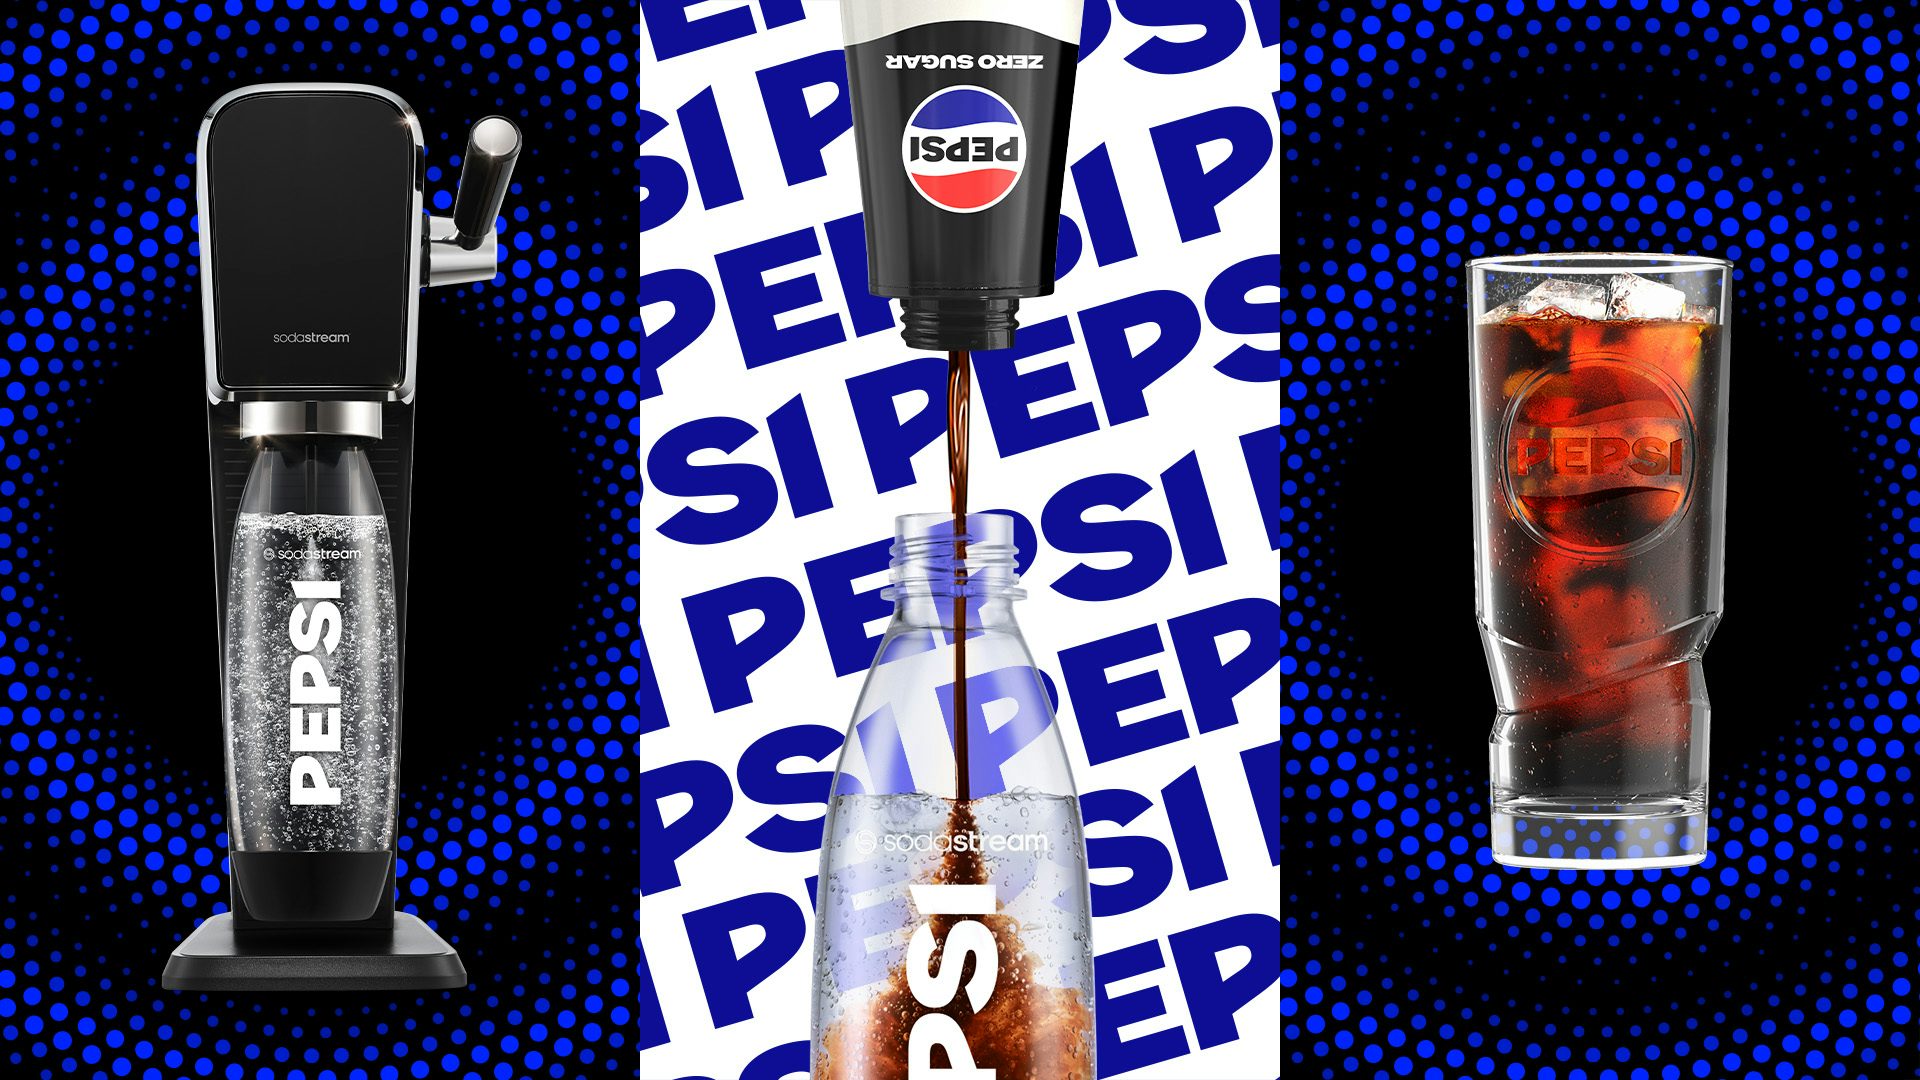 Graphic shows the new Pepsi branding being used on Pepsi sodastream